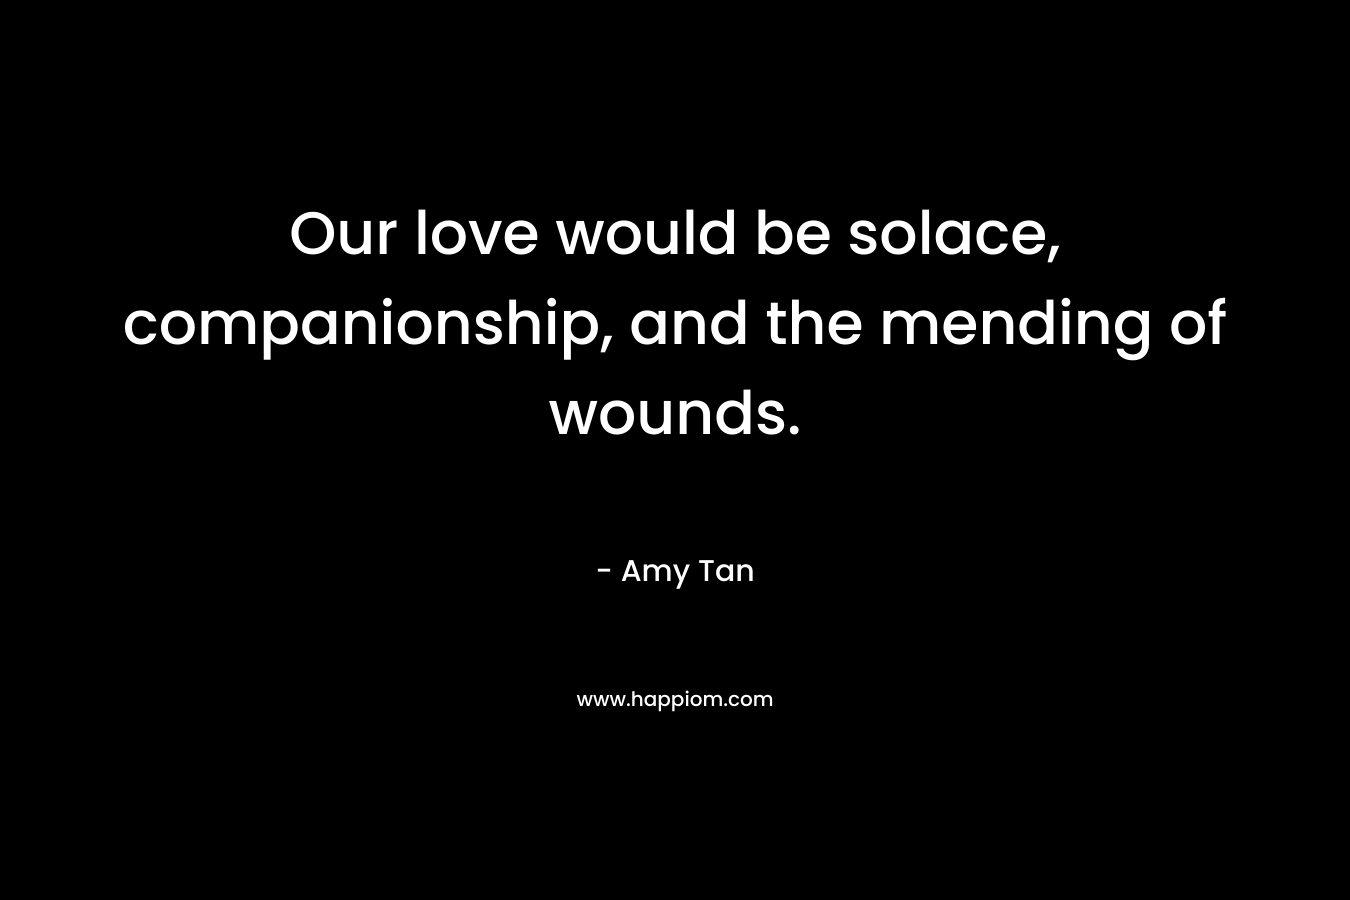 Our love would be solace, companionship, and the mending of wounds.